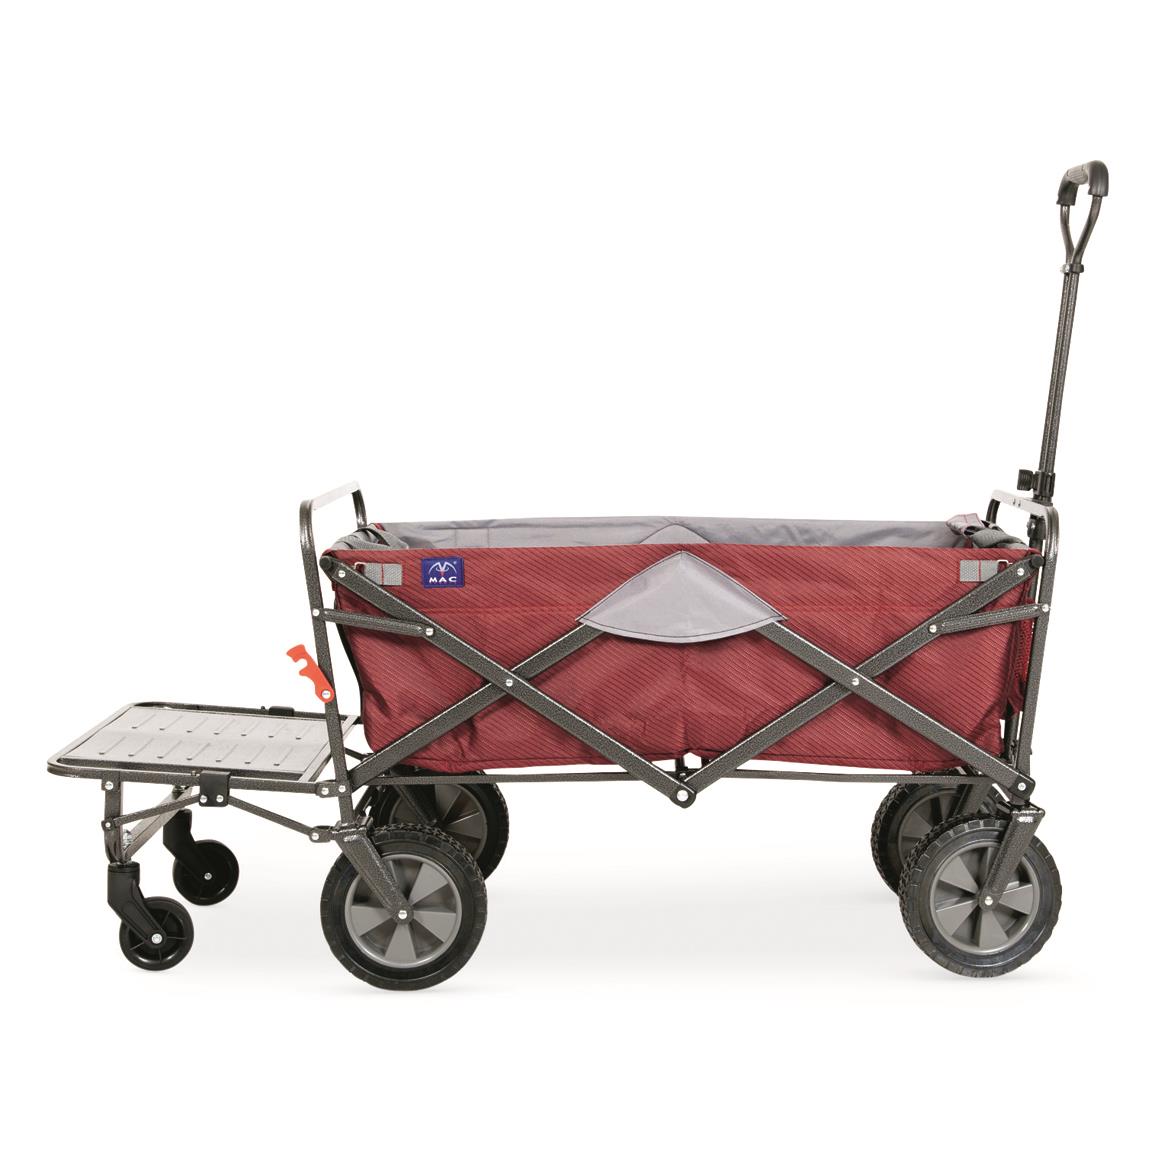 MACSPORTS Outdoor Utility Tailgate Wagon with Cargo Trailer, Red